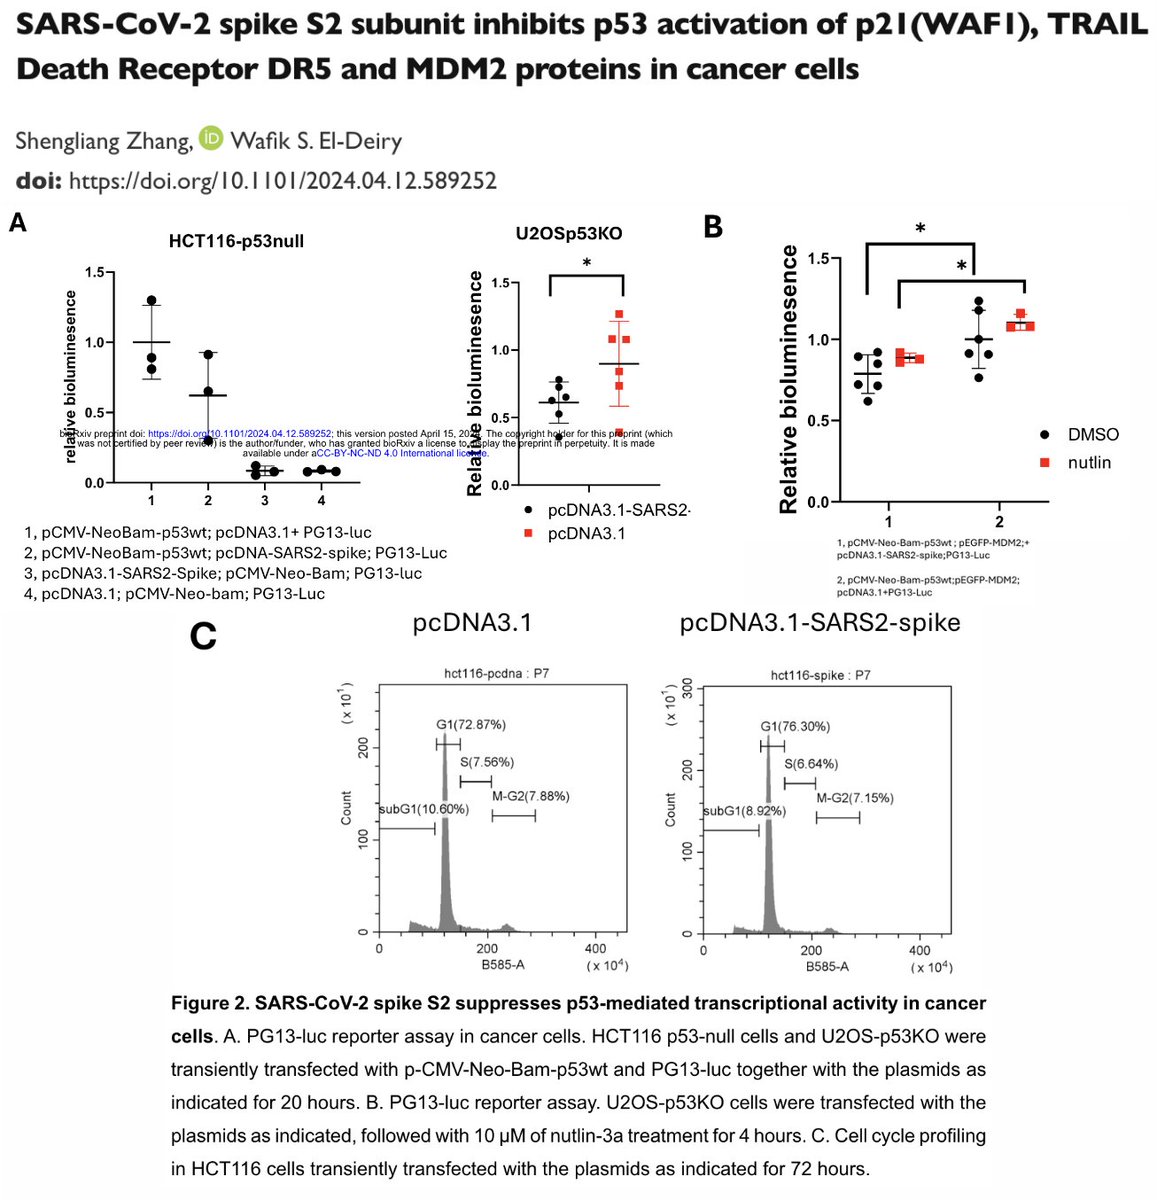 NEW STUDY: SARS-CoV-2 Spike protein, which is produced by cells after COVID-19 mRNA vaccination, suppresses p53 transcriptional activity in cancer cells, leading to altered DNA damage sensing and possible uncontrolled cancer growth. This is the first study to demonstrate this…